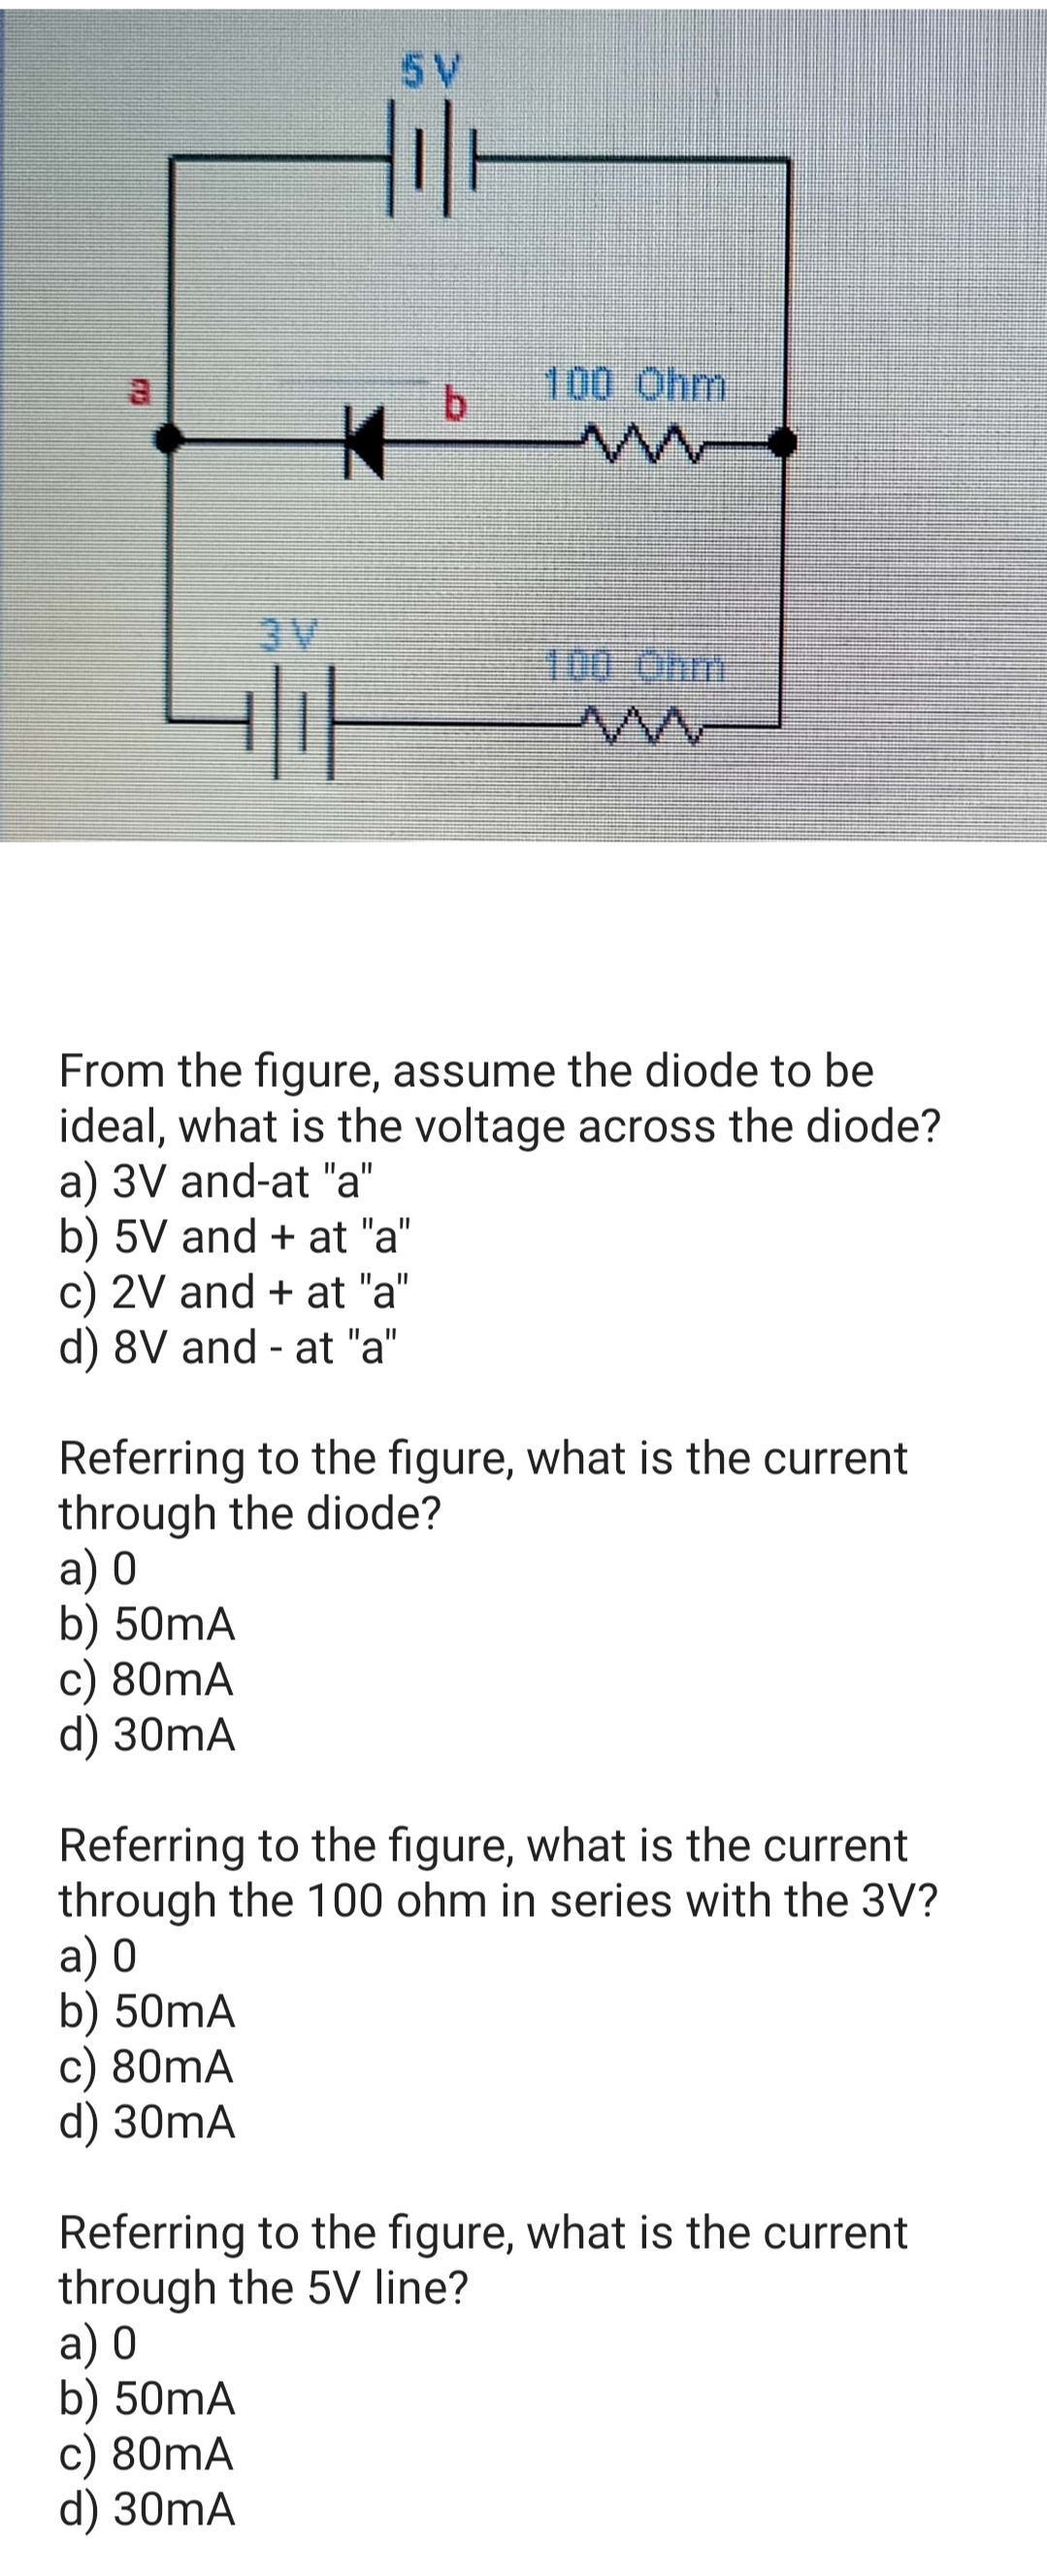 5V
100 Ohm
b.
3V
100 Ohm
From the figure, assume the diode to be
ideal, what is the voltage across the diode?
a) 3V and-at "a"
b) 5V and + at "a"
c) 2V and + at "a"
d) 8V and - at "a"
Referring to the figure, what is the current
through the diode?
а) 0
b) 50mA
c) 80mA
d) 30mA
Referring to the figure, what is the current
through the 100 ohm in series with the 3V?
а) 0
b) 50mA
c) 80mA
d) 30mA
Referring to the figure, what is the current
through the 5V line?
а) 0
b) 50mA
c) 80mA
d) 30mA
